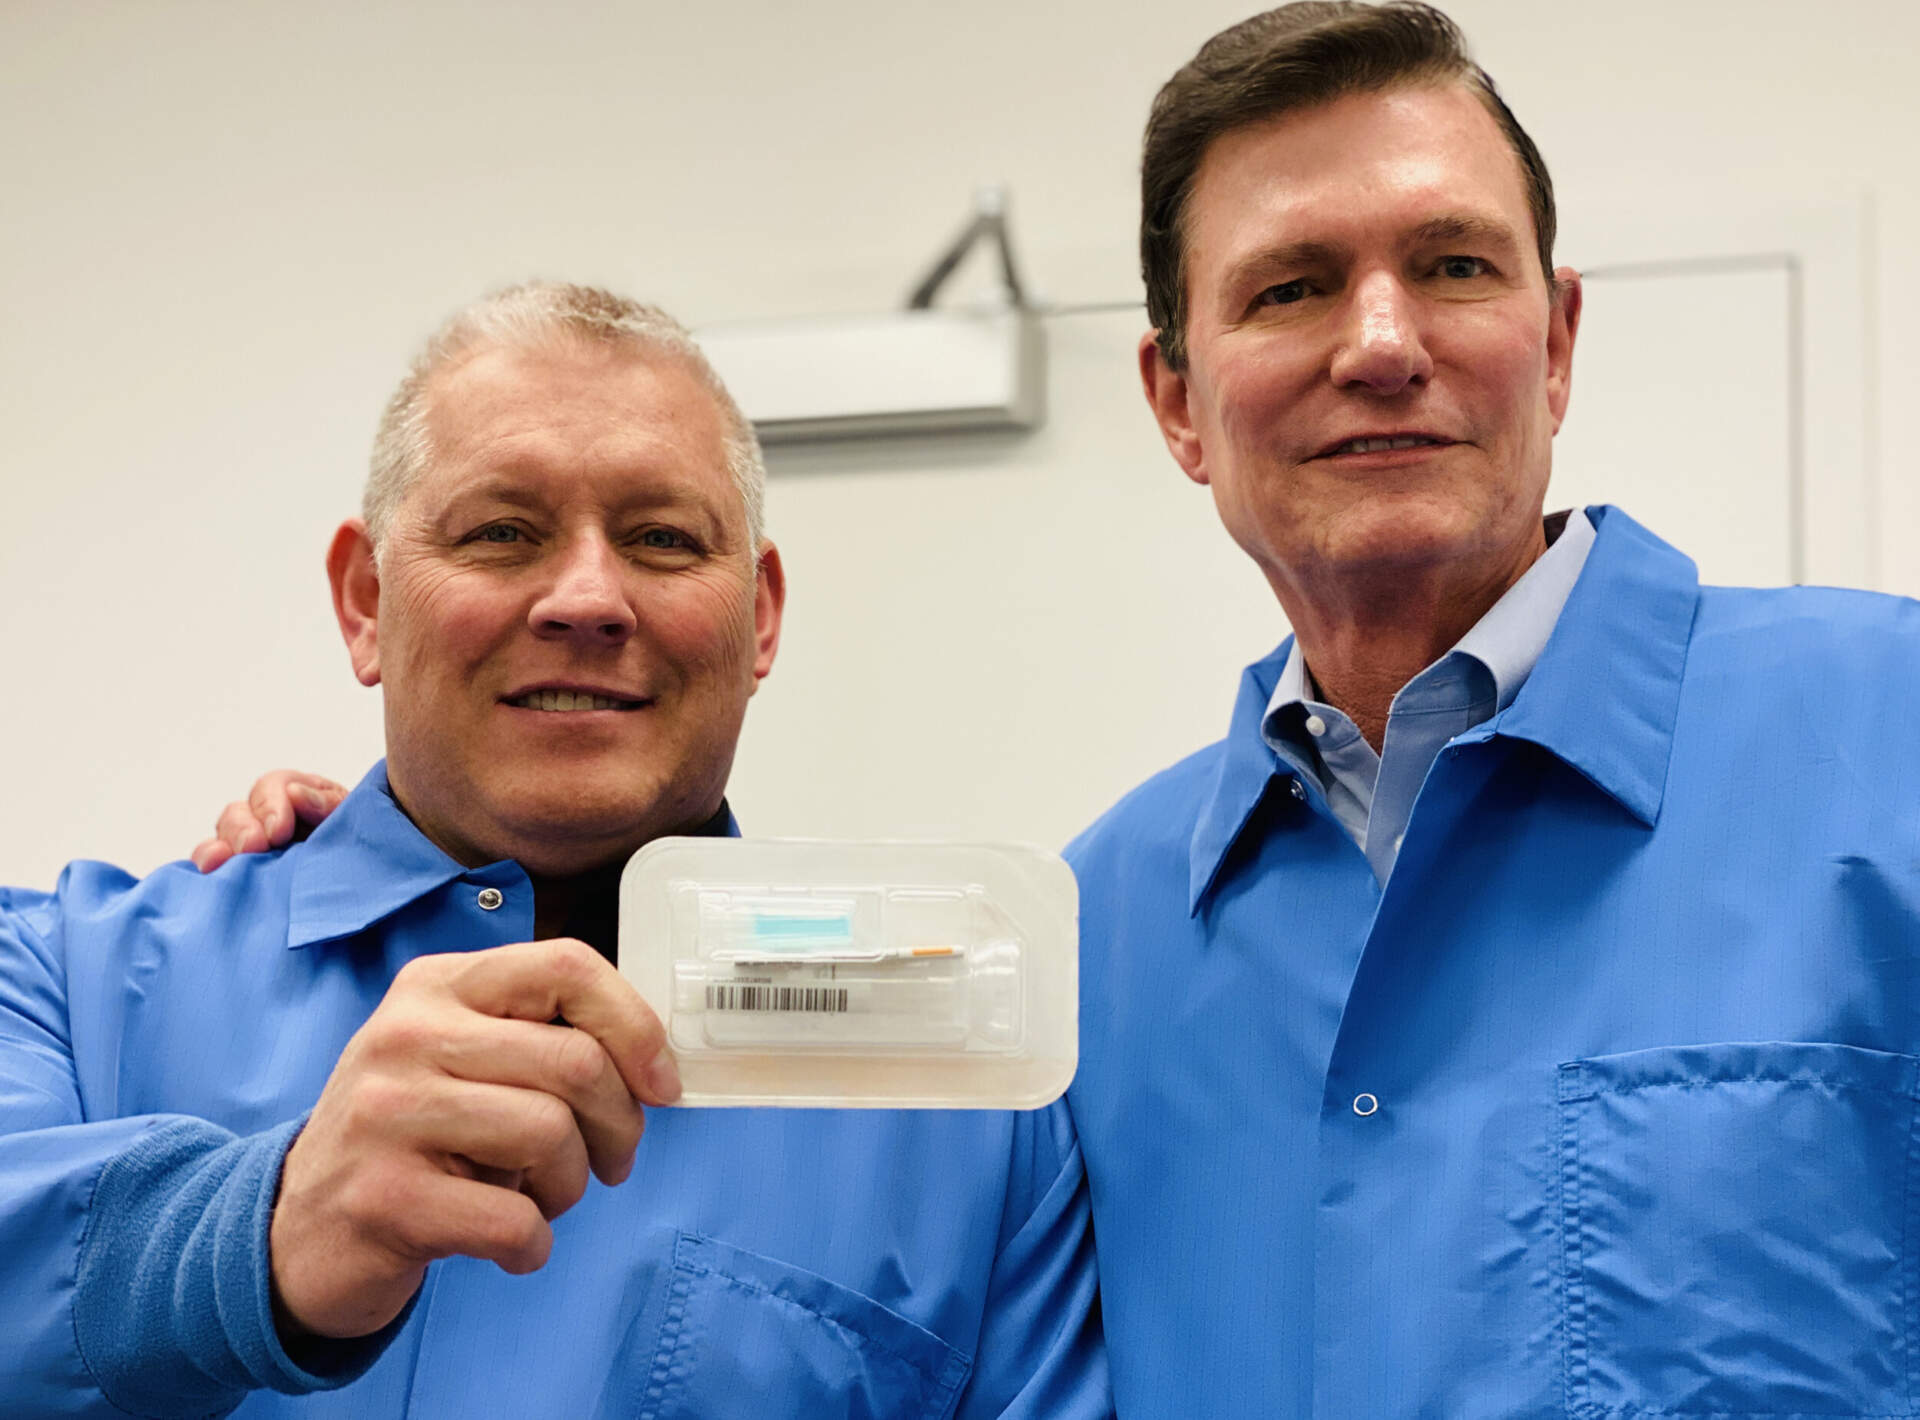 Spectrum's CEO and COO in background of photo with SDNA-1000 saliva DNA/RNA collection device